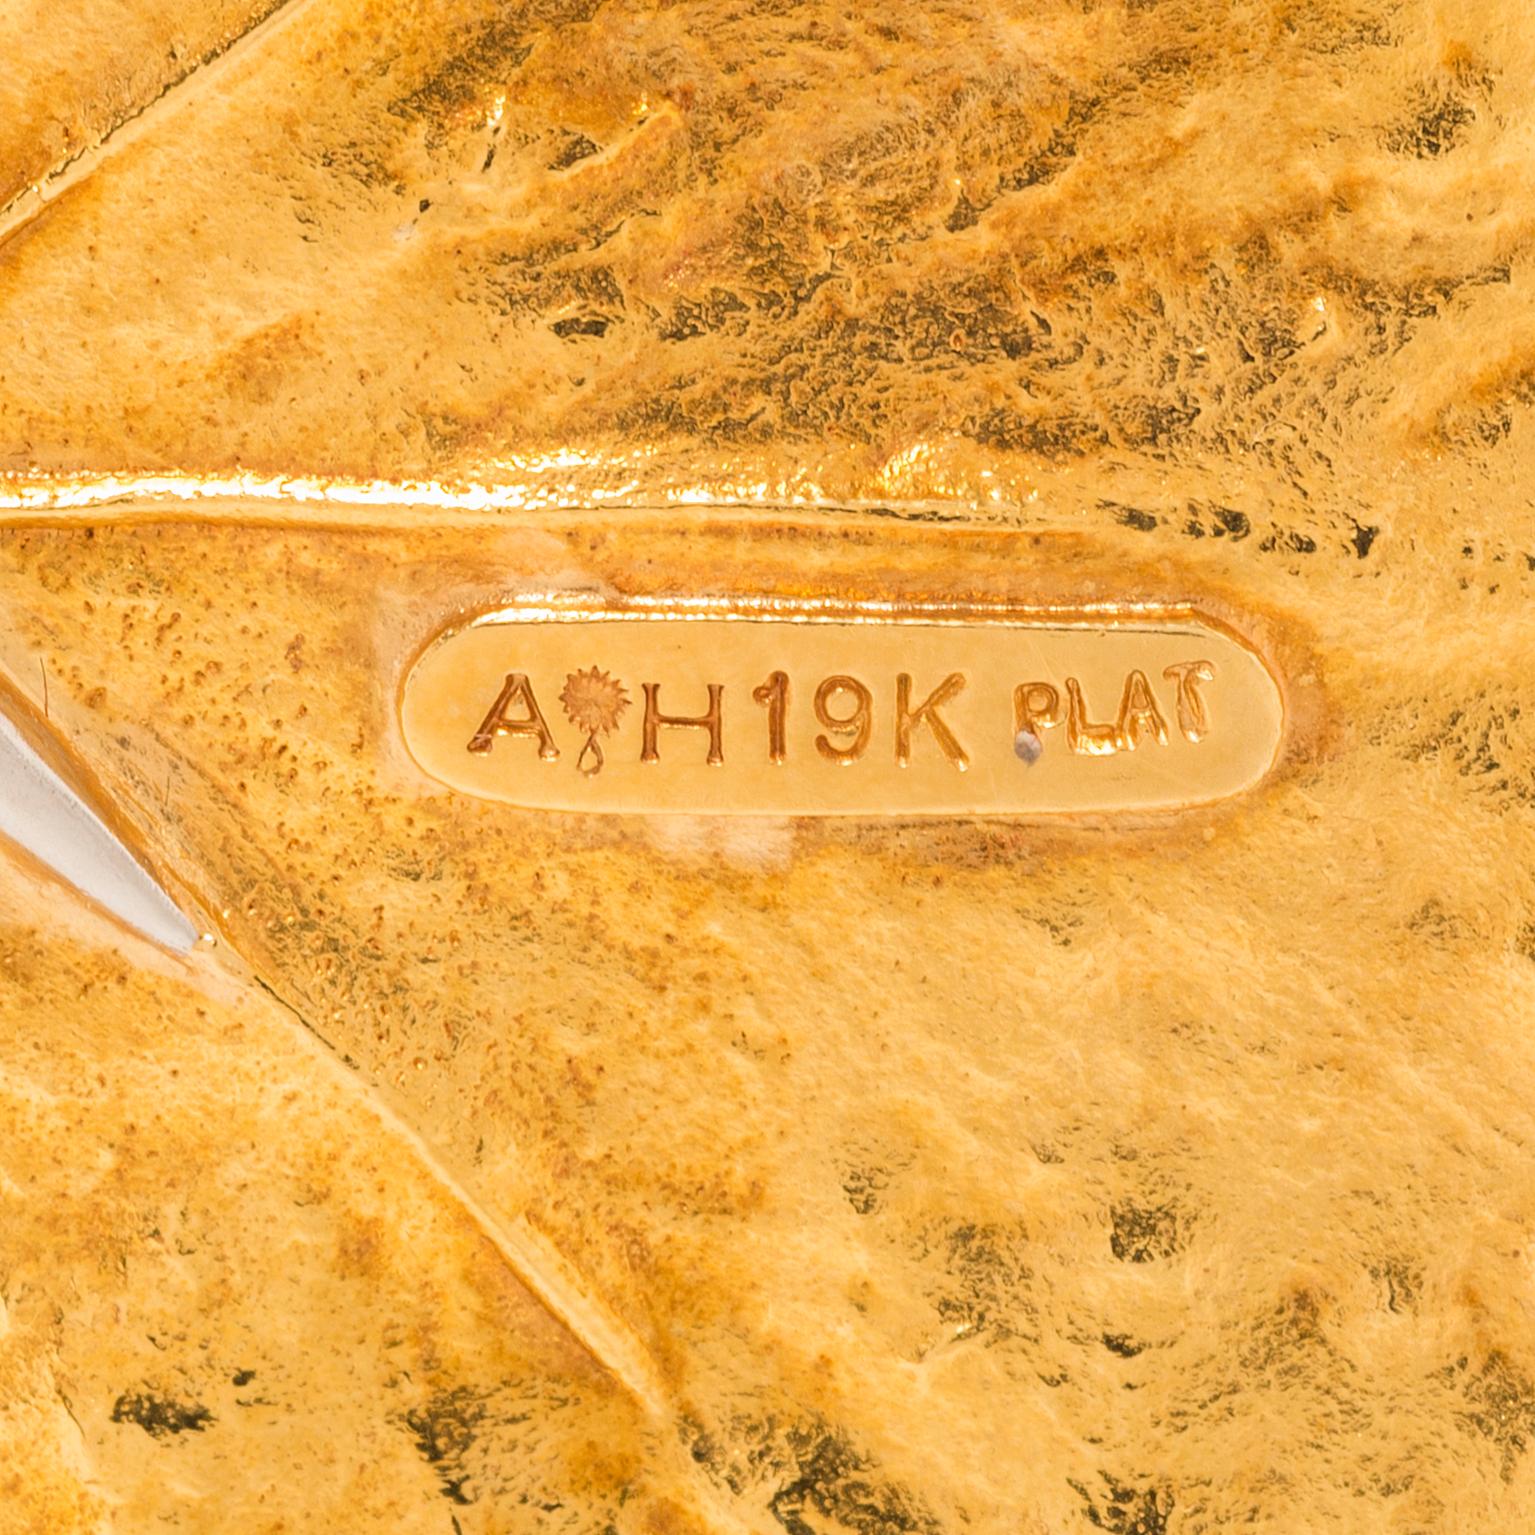 Comprising a brooch of leaf motif, with diamond-set stem, with an Aaron Henry ‘AH’ maker’s mark, set in 19k yellow gold and platinum.

2 ½ inches x 2 ¾ inches
12 round diamonds weighing a total of approximately 0.15 carat